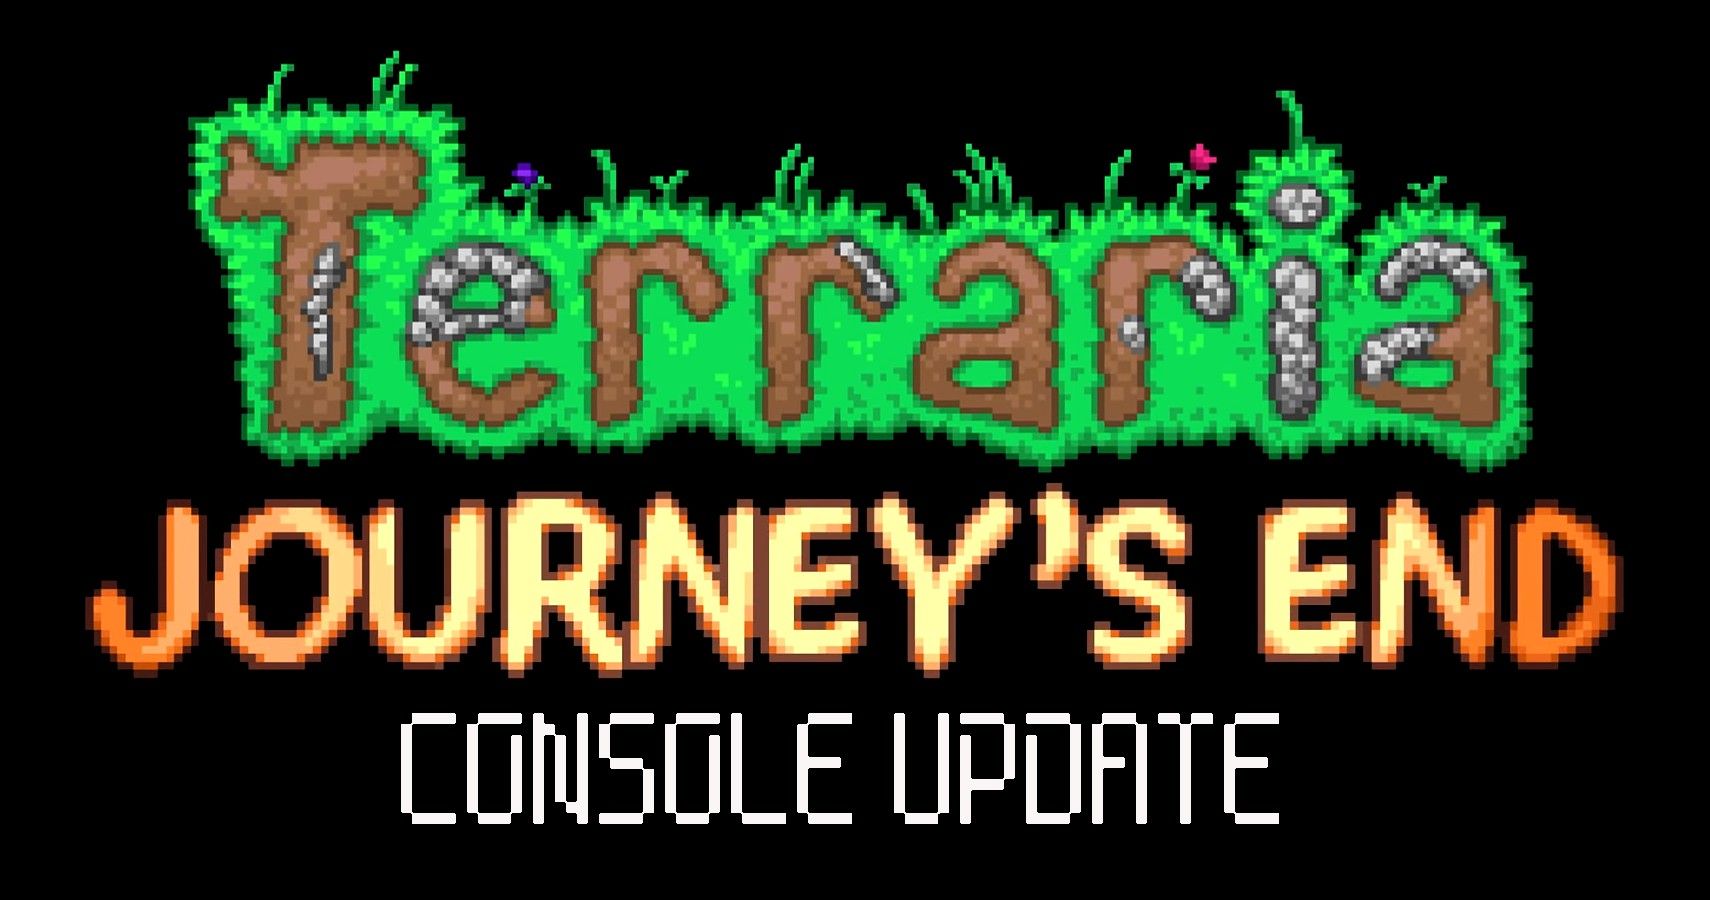 Terraria Announces Cross-Play Between Consoles And Mobile Coming